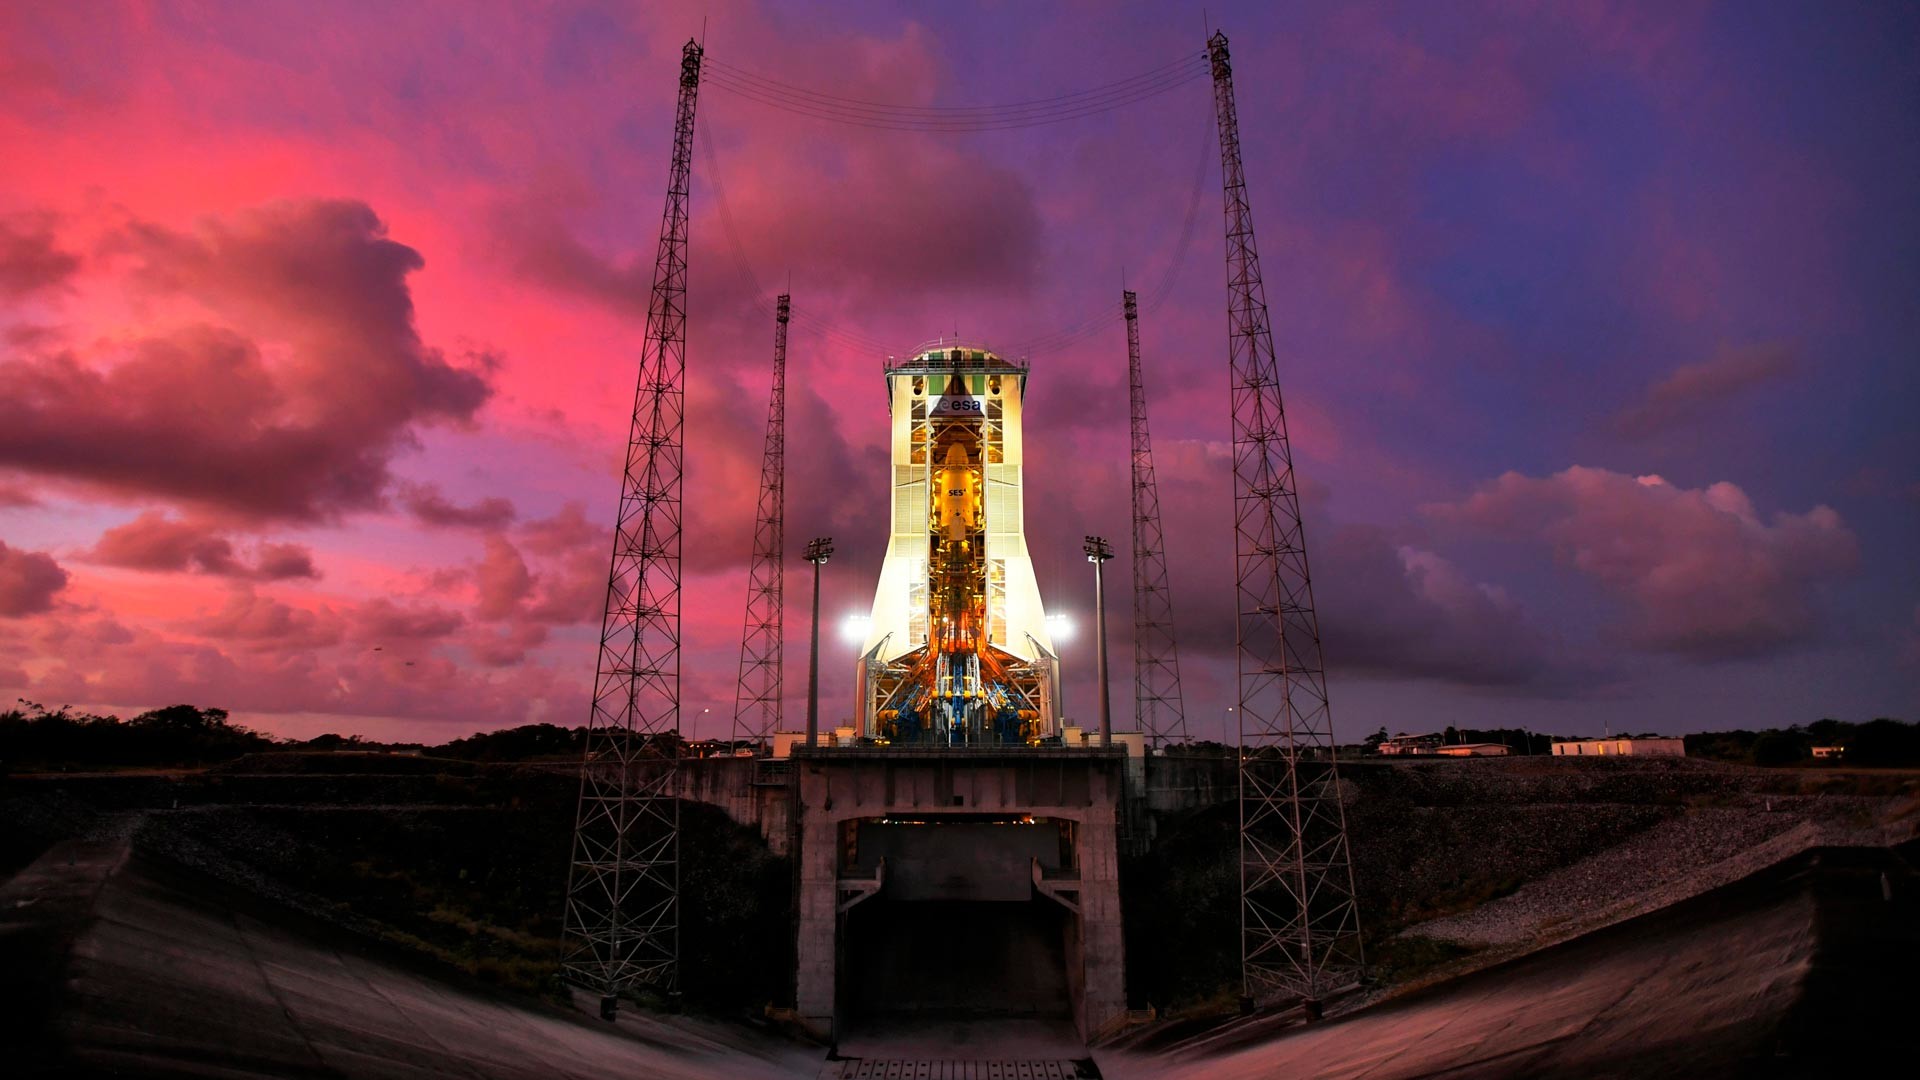 The launch pad of the Kourou cosmodrome in French Guiana.